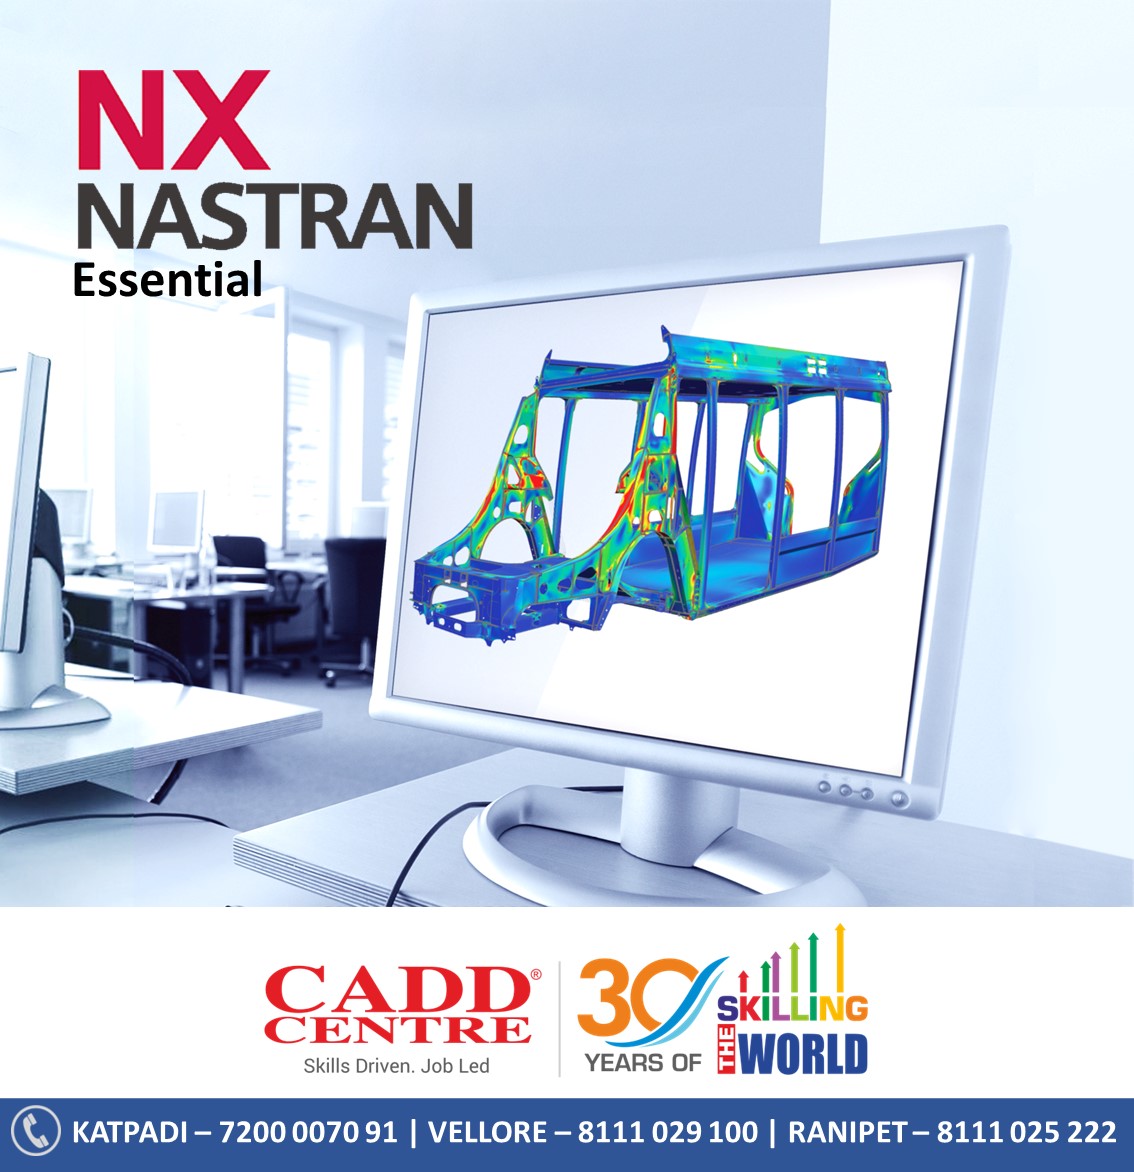 Learn NX Nastran to build your Design Career!@caddcentrevellore

Register Now!

#caddcentre #caddcentrevellore #livewireindia #livewirevellore #CAD #students #mechanical #engineers #NASTRAN #NXCAD #AutoCAD  #solidworks #ANSYS #FEA #meshing #buklinganalysis #vellore #ranipet